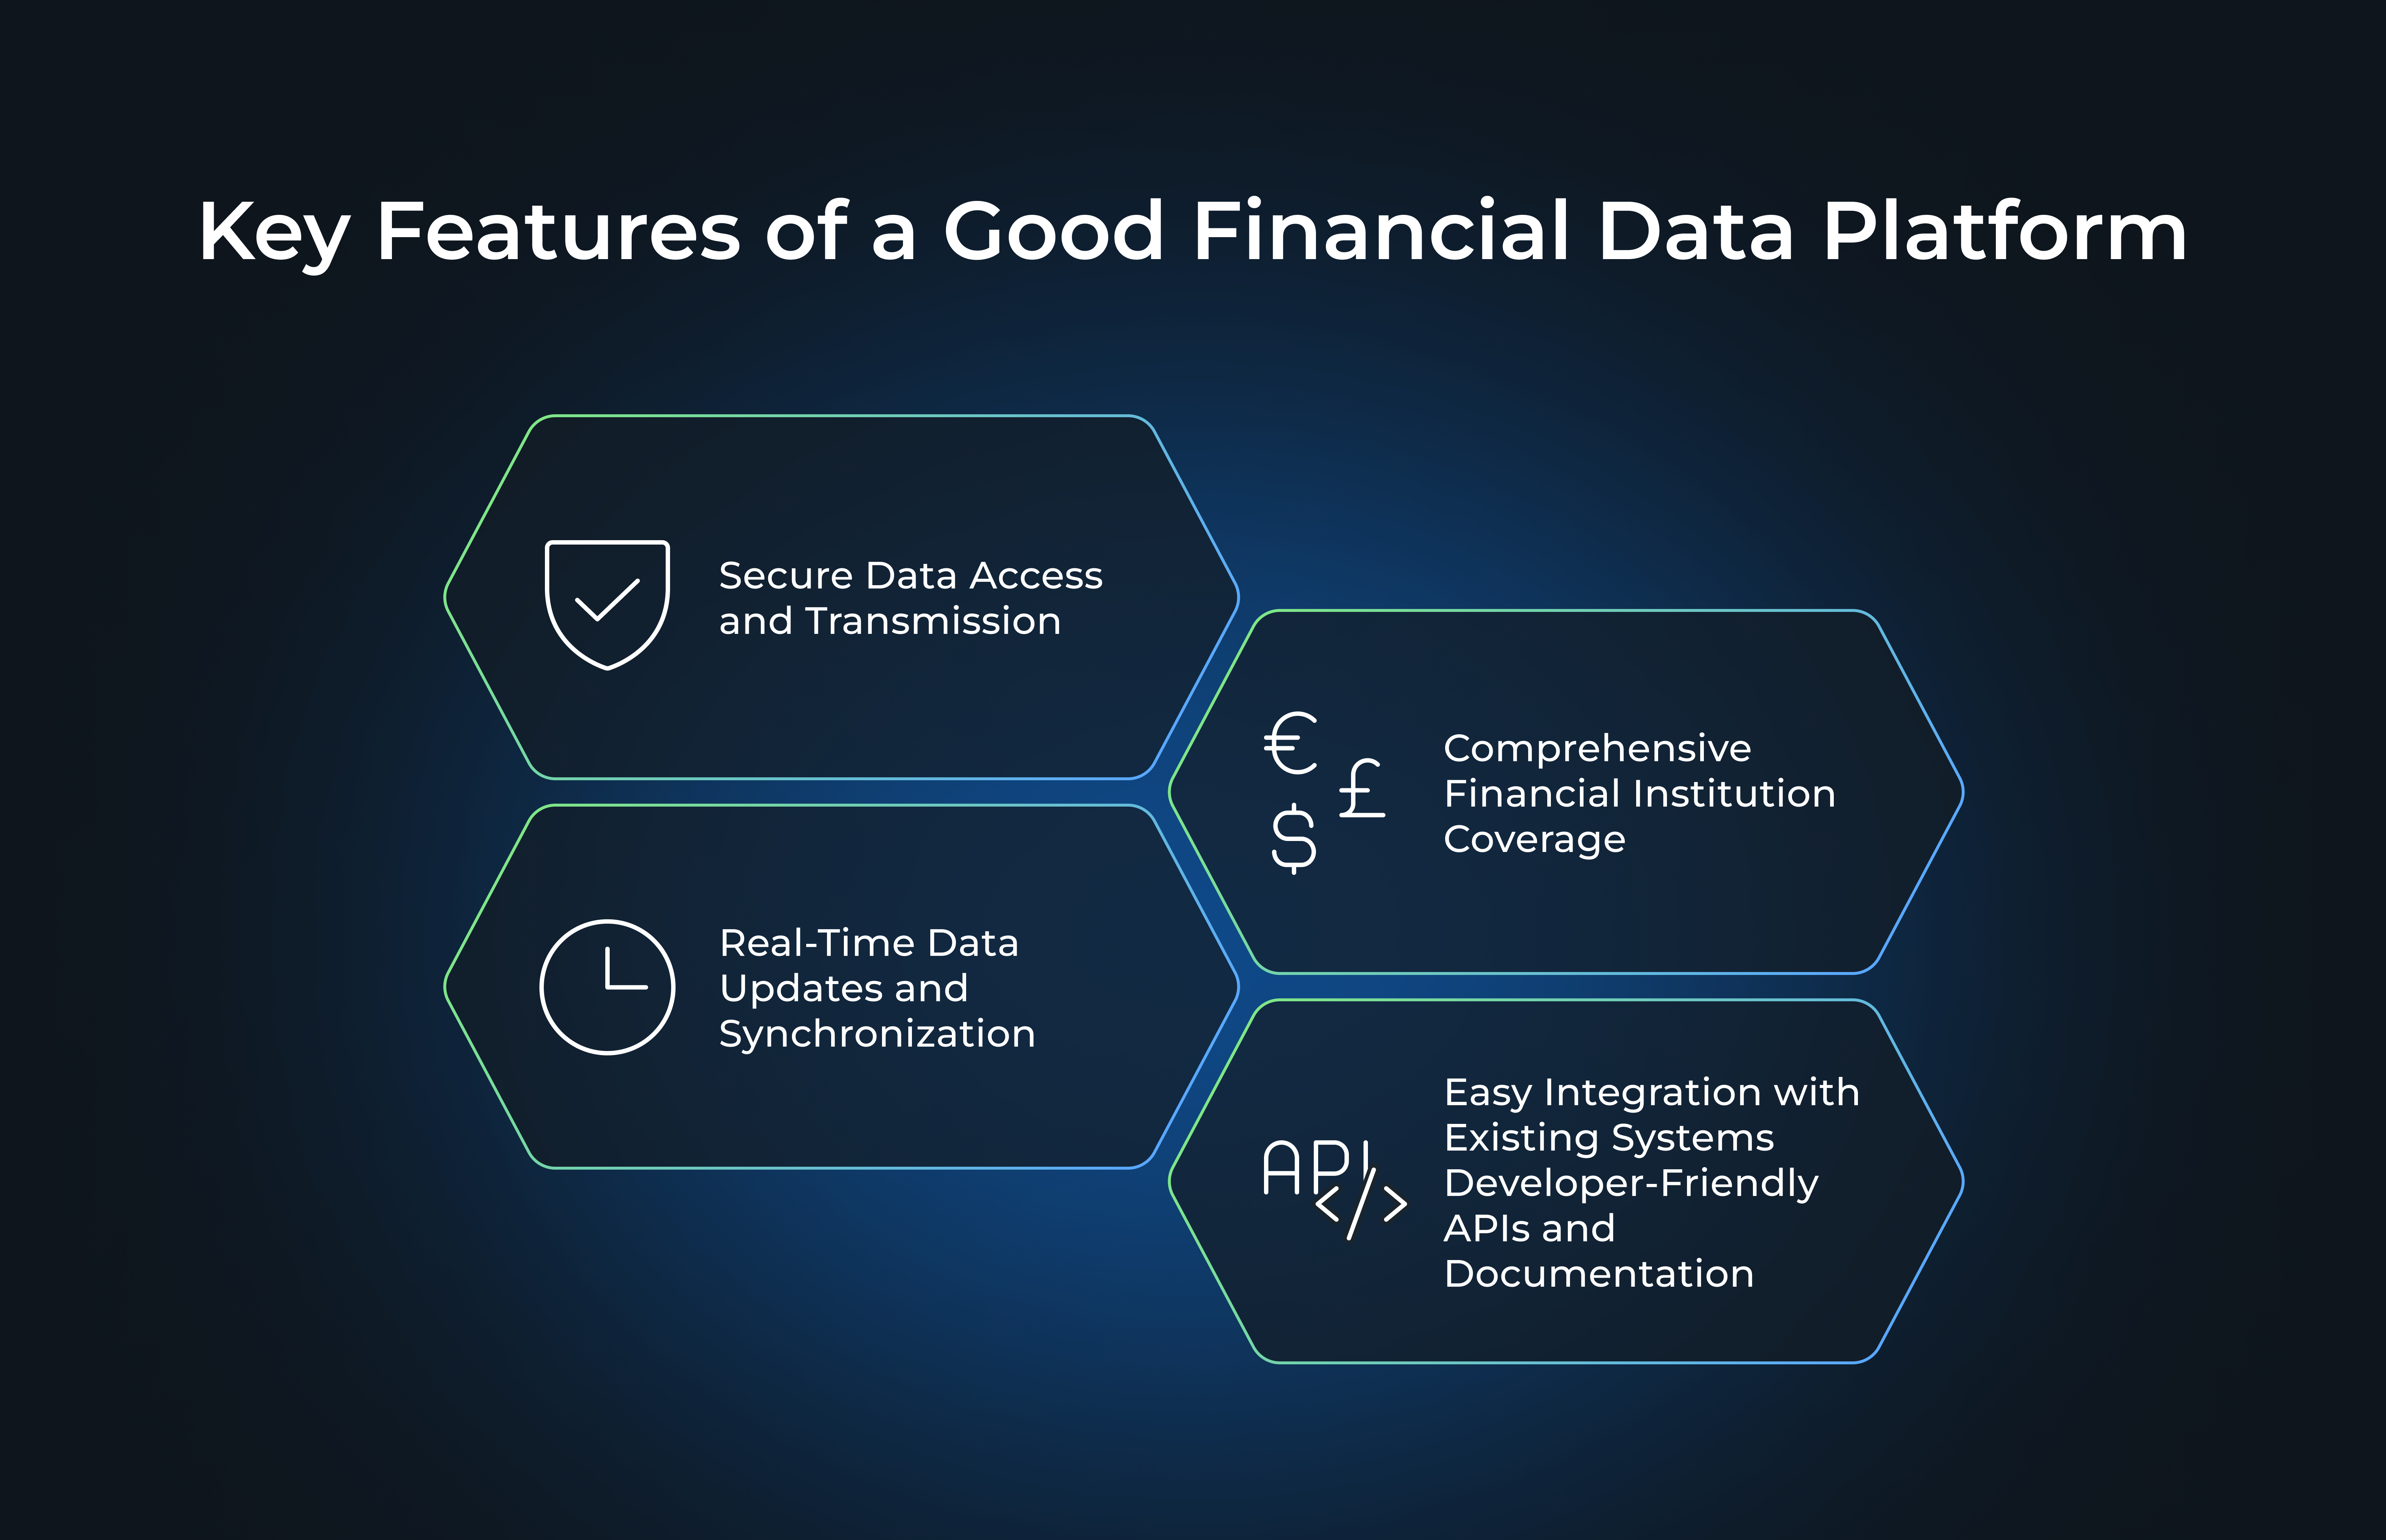 Key Features of a Good Financial Data Platform: Secure Data Access and Transmission, Comprehensive Financial Institution Coverage, Real-Time Data Updates and Synchronization, Easy Integration with Existing Systems Developer, Friendly APIs and Documentation